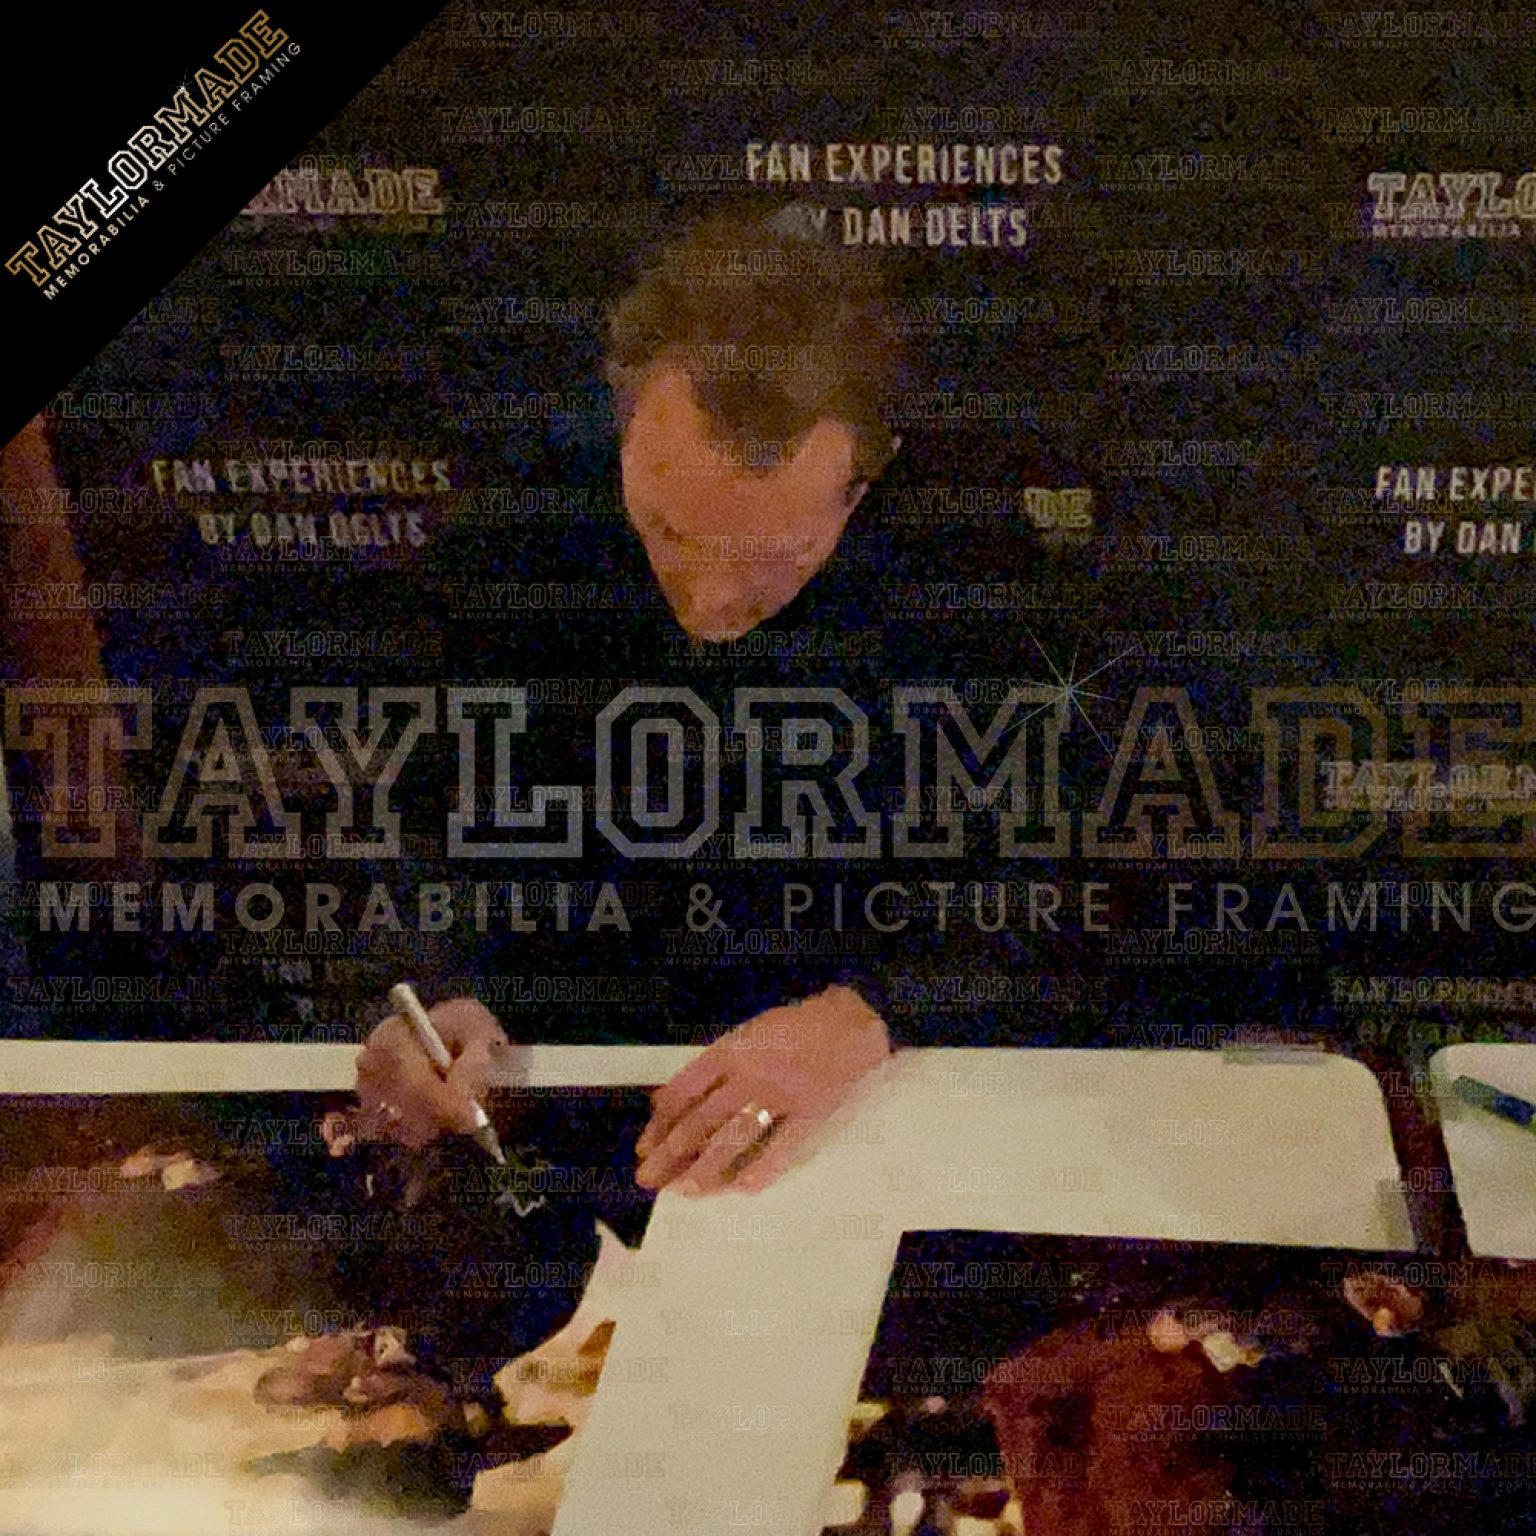 Michael Biehn Tombstone Signed And Framed 16x20 Photo Display Taylormade Memorabilia